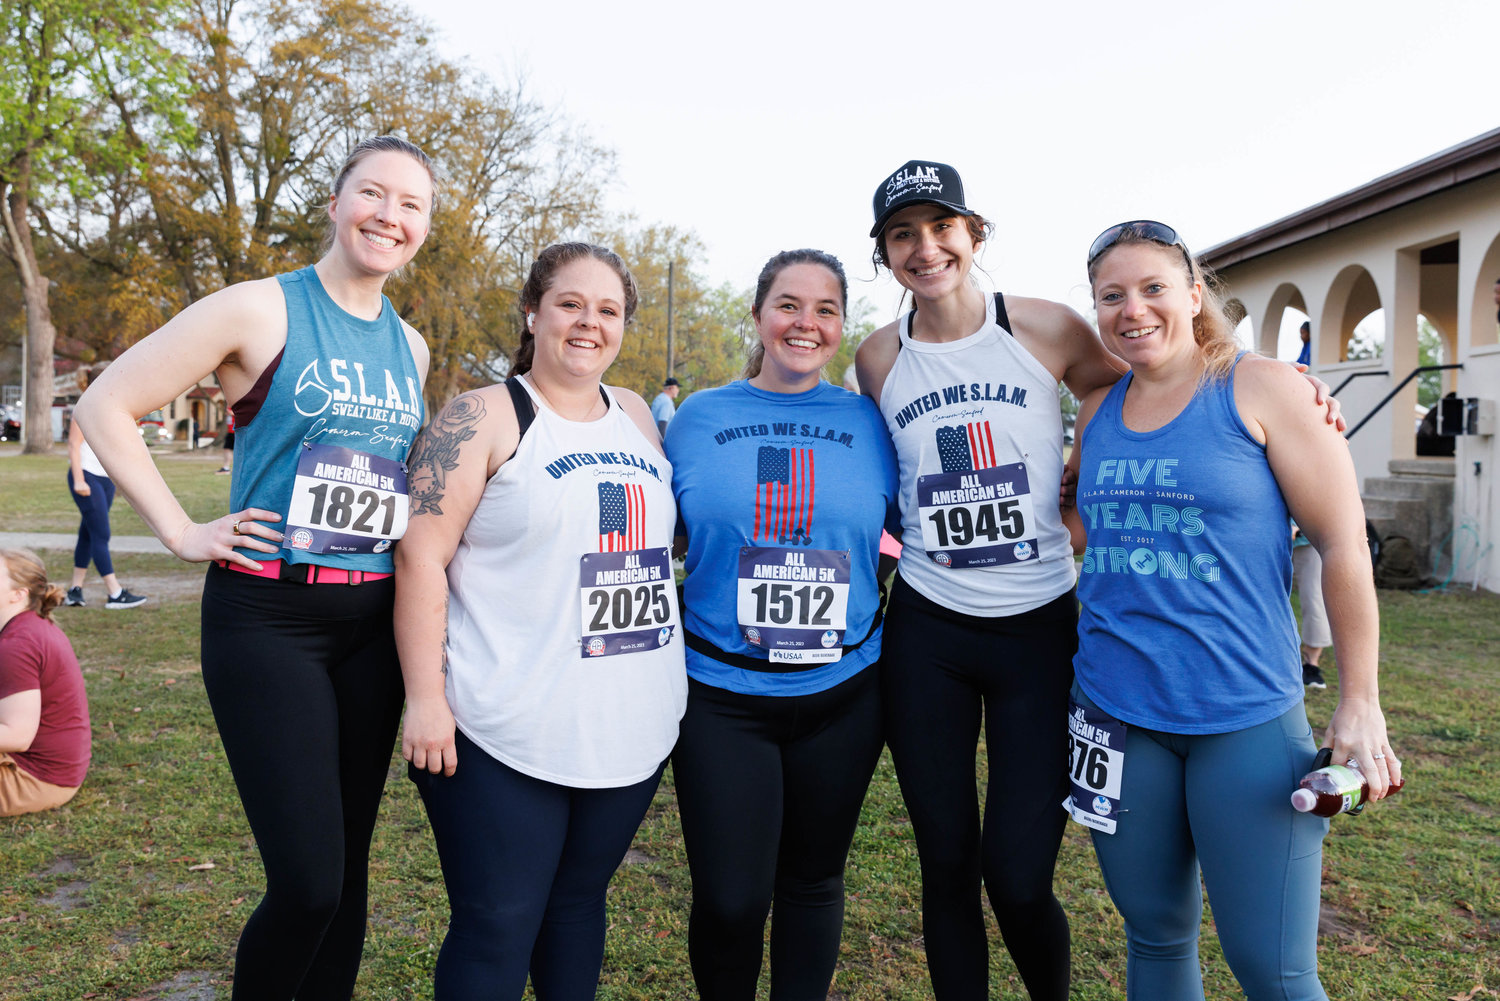 Cassandra Perkins, Kelsy Villatora, Meagan Estepp, Sarah Smalley, and Katherine O'Reilly, representing the Cameron/Sanford chapter of Sweat Like a Mother (S.L.A.M.), prepare for the start of the All American Races on  Fort Bragg on March 25, 2023.  Tony Wooten/CityView Media